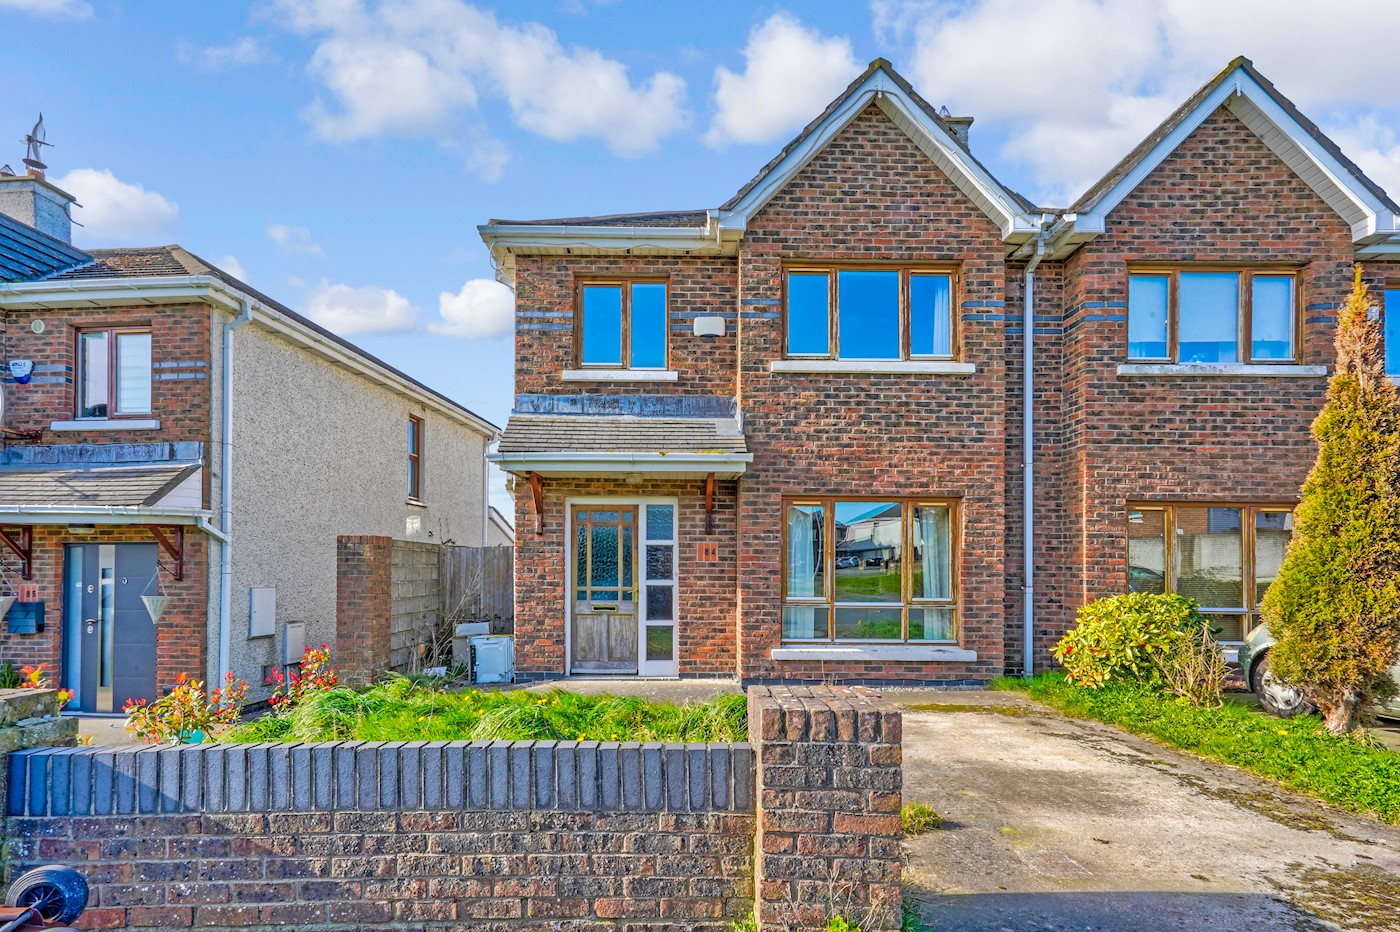 84 Branswood, Athy, Co. Kildare, R14 X409 1/15